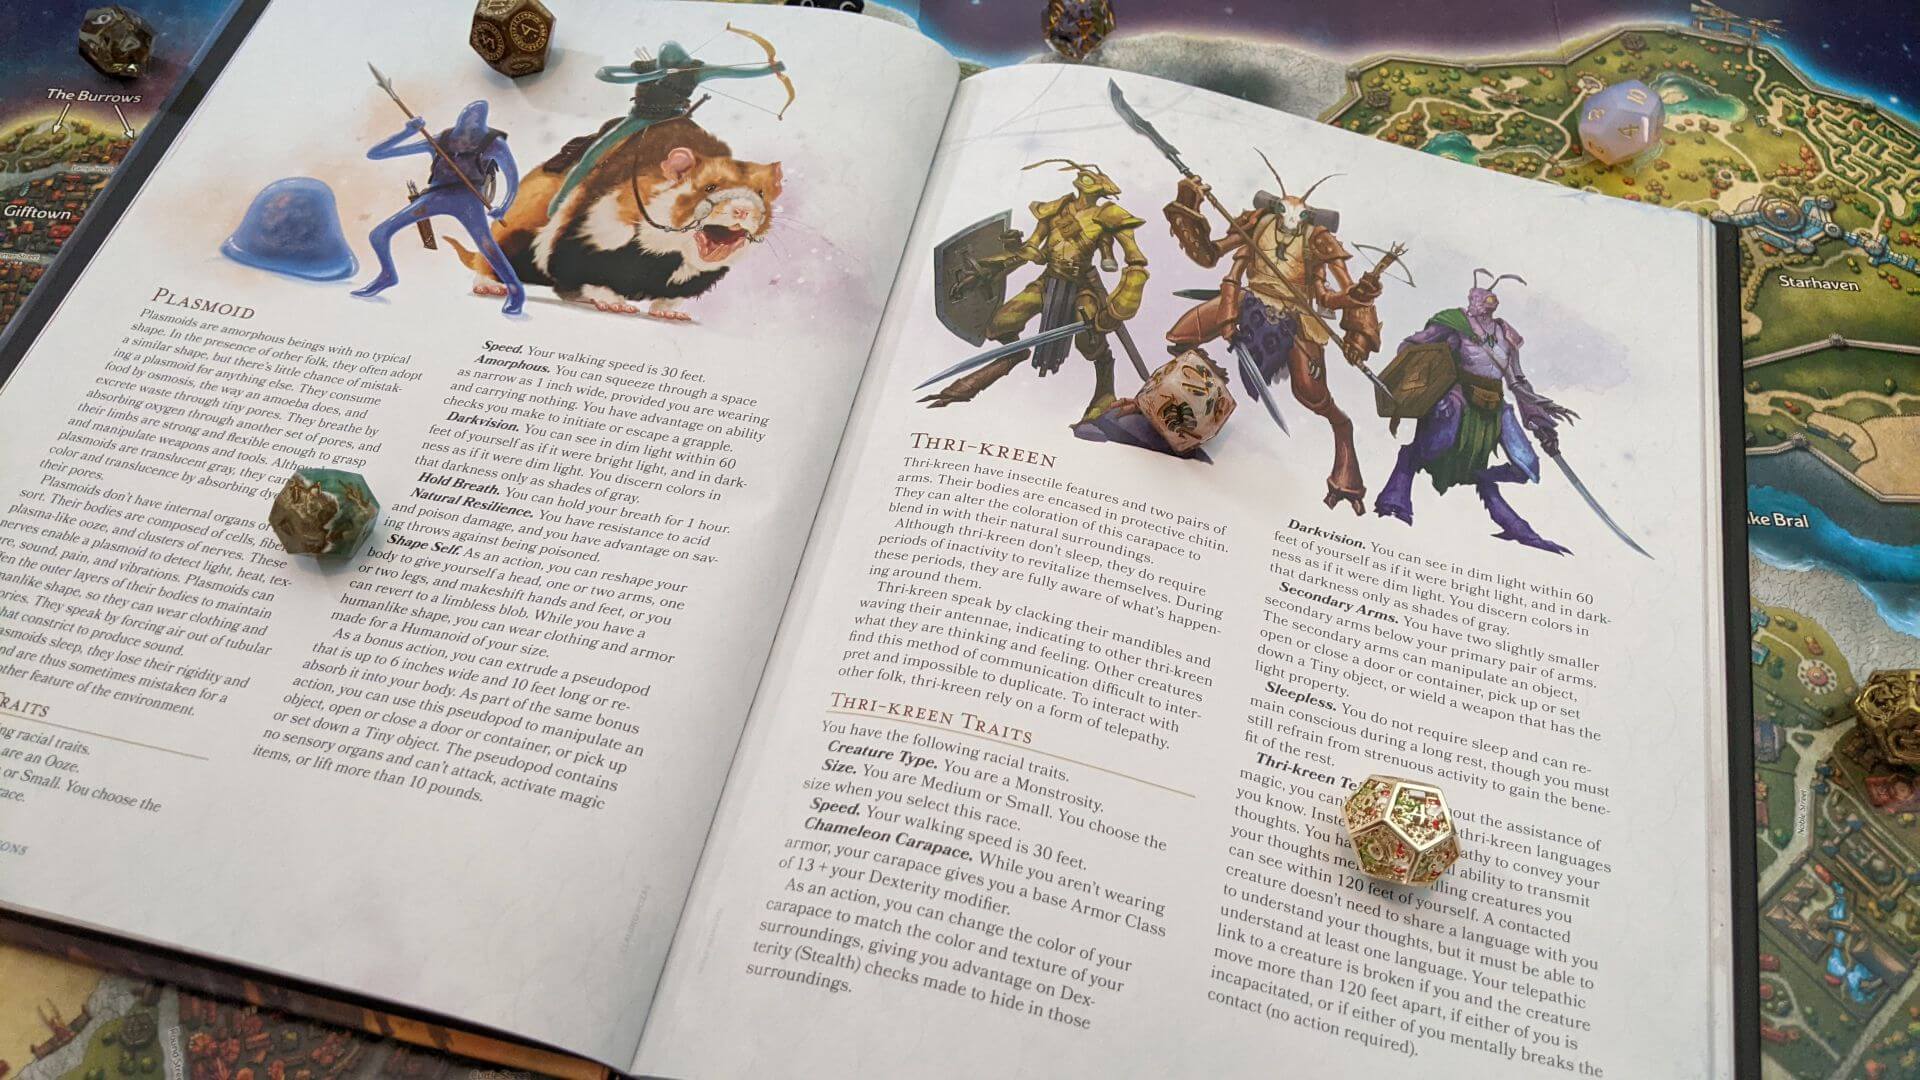 The character pages for the Plasmoid and Thri-Kreen races added to D&D e5 with Spelljammer